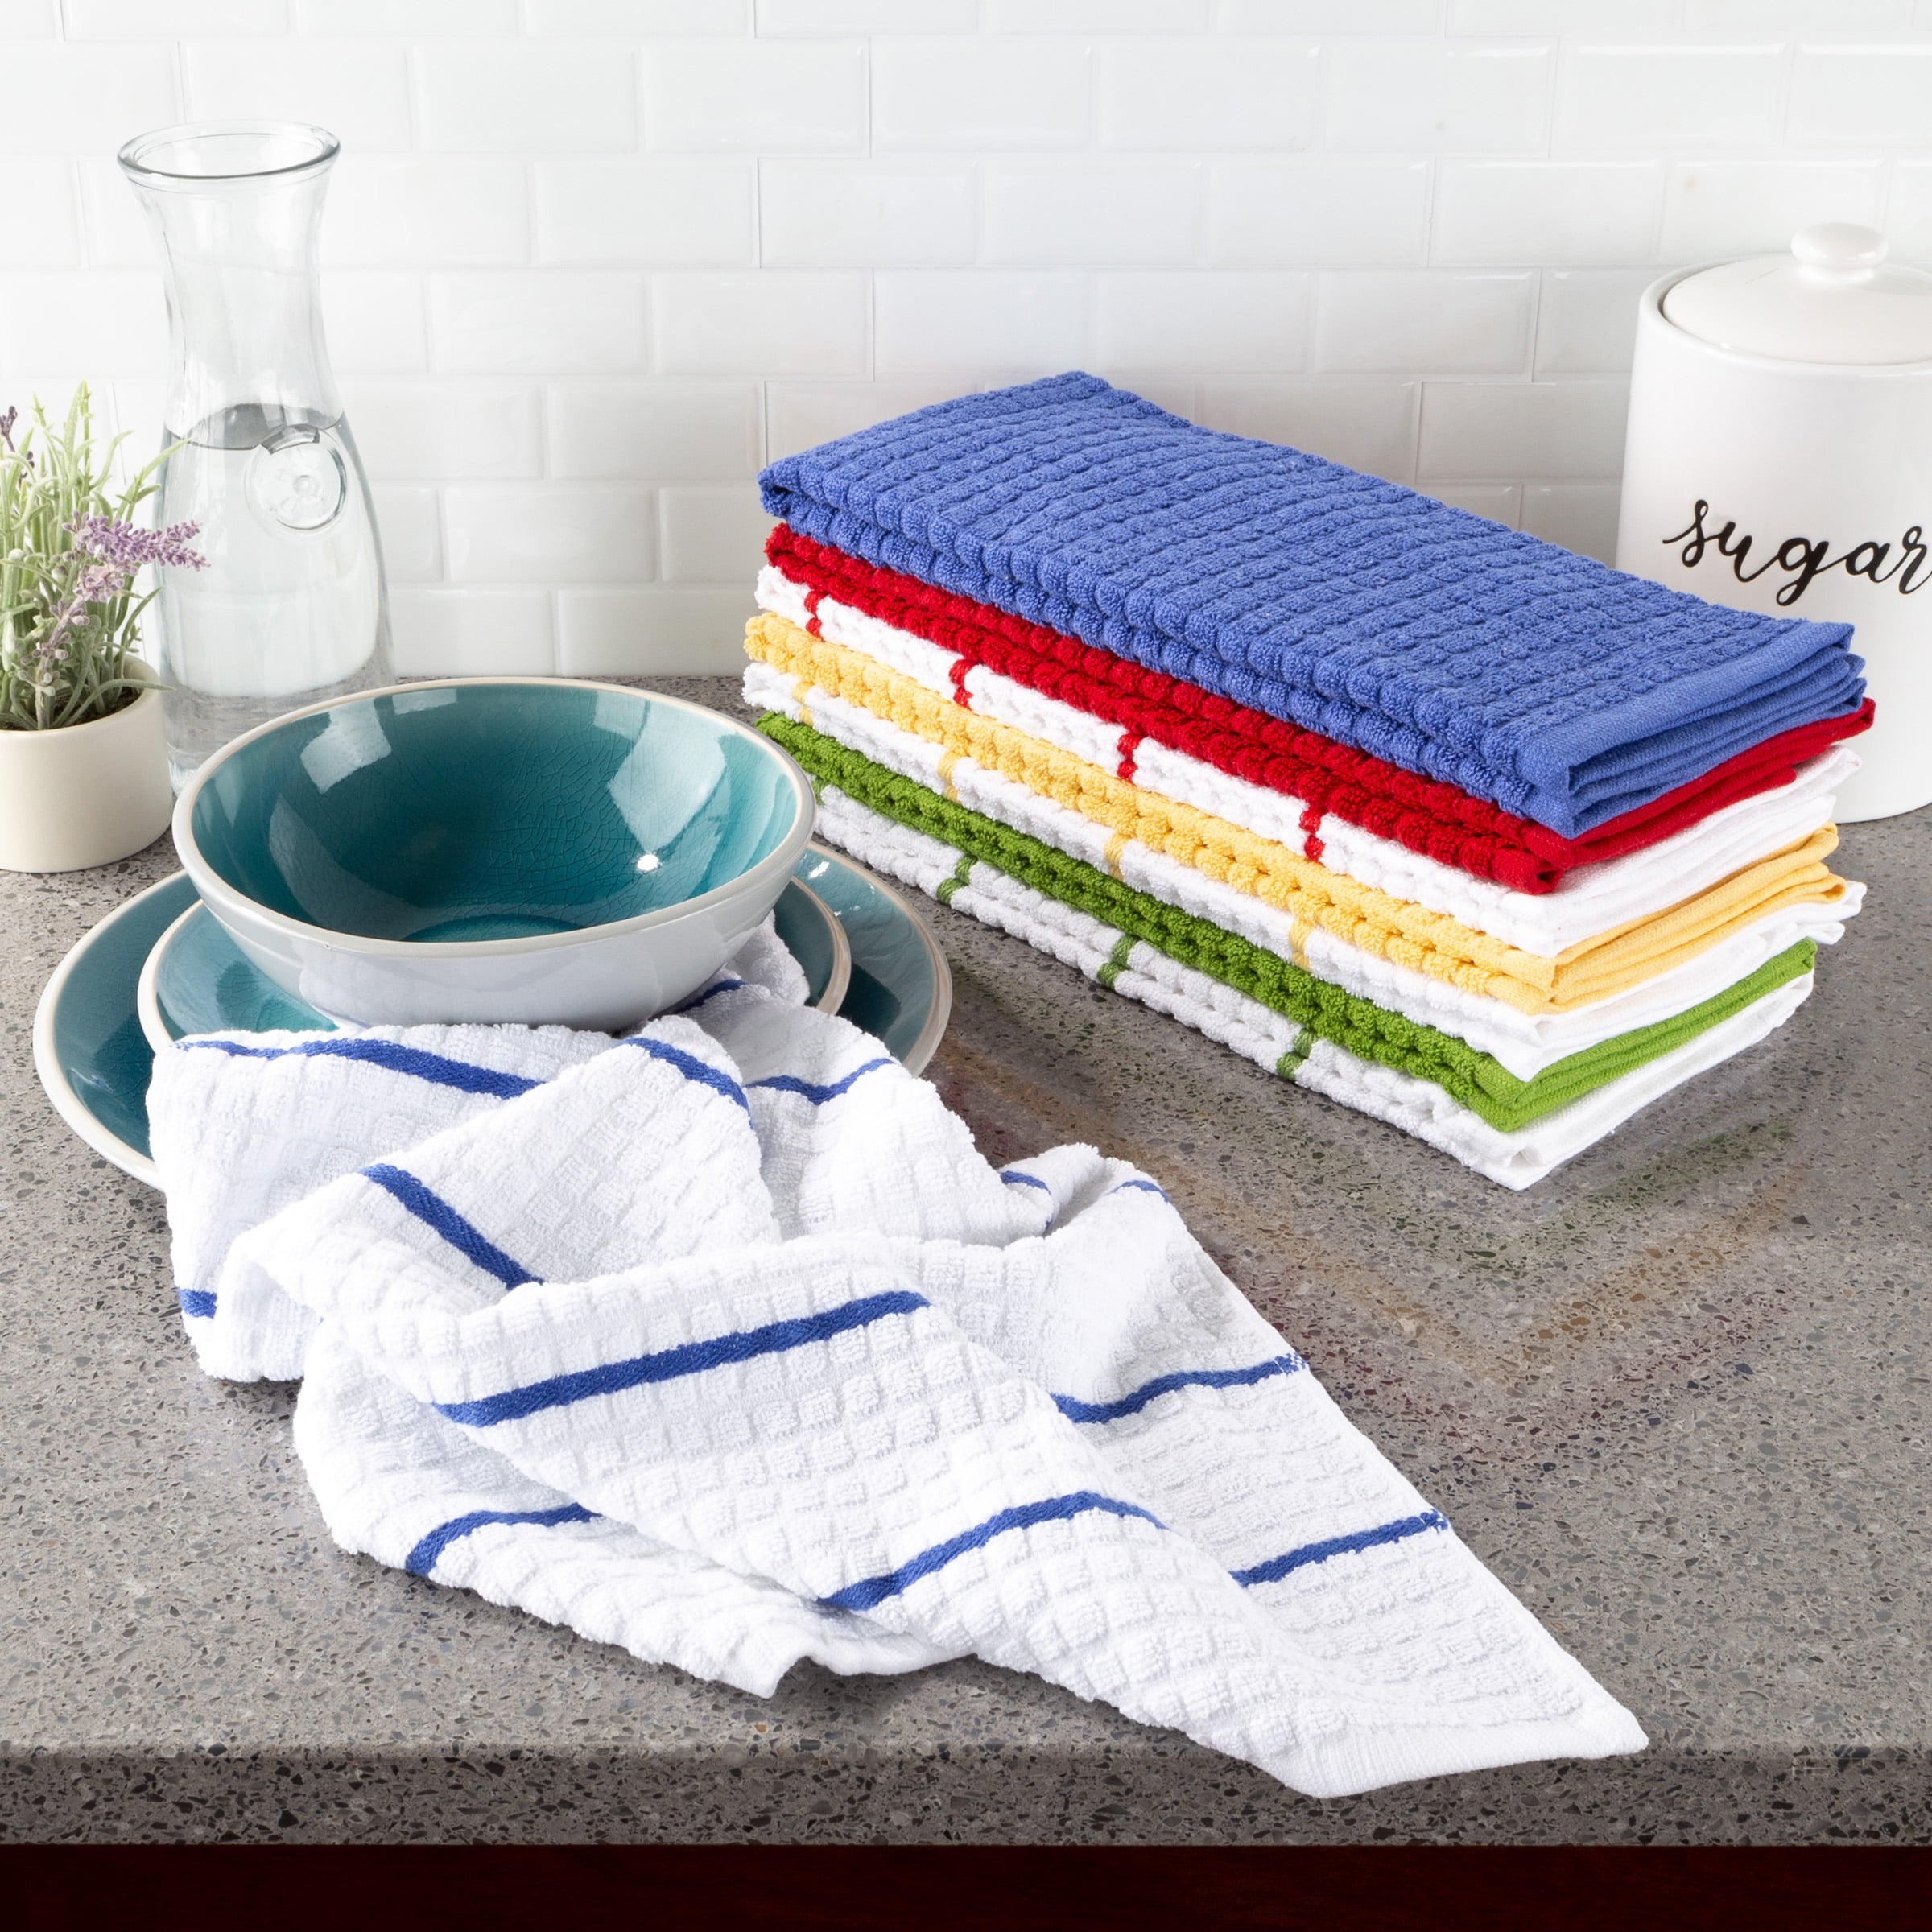 8 pack 100% Cotton Kitchen Towels with Stripes and Solids by Somerset Home  16”x28